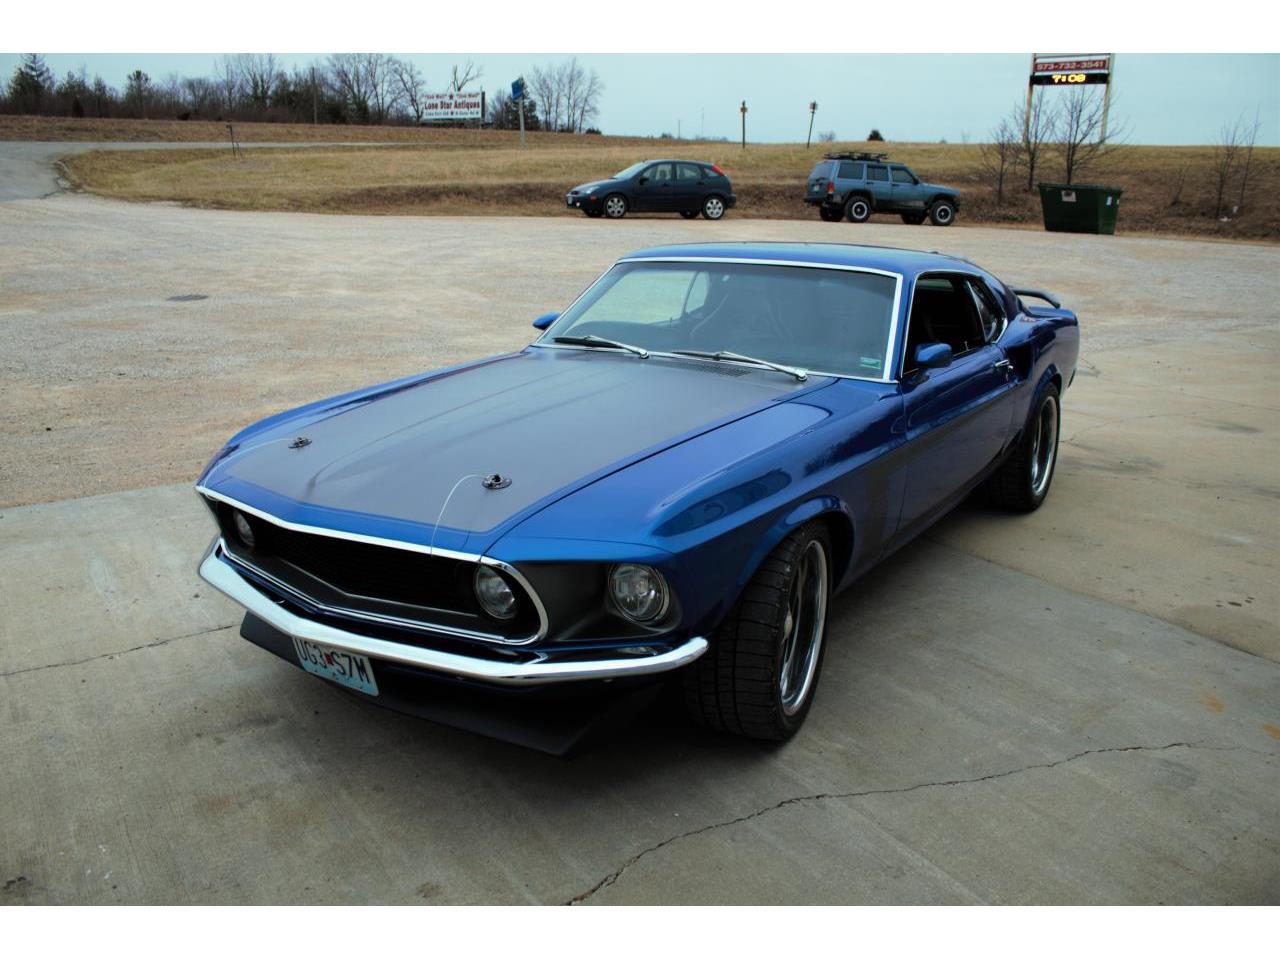 1969 Mustang Boss 302 Mach 1 for Sale | ClassicCars.com | CC-965867